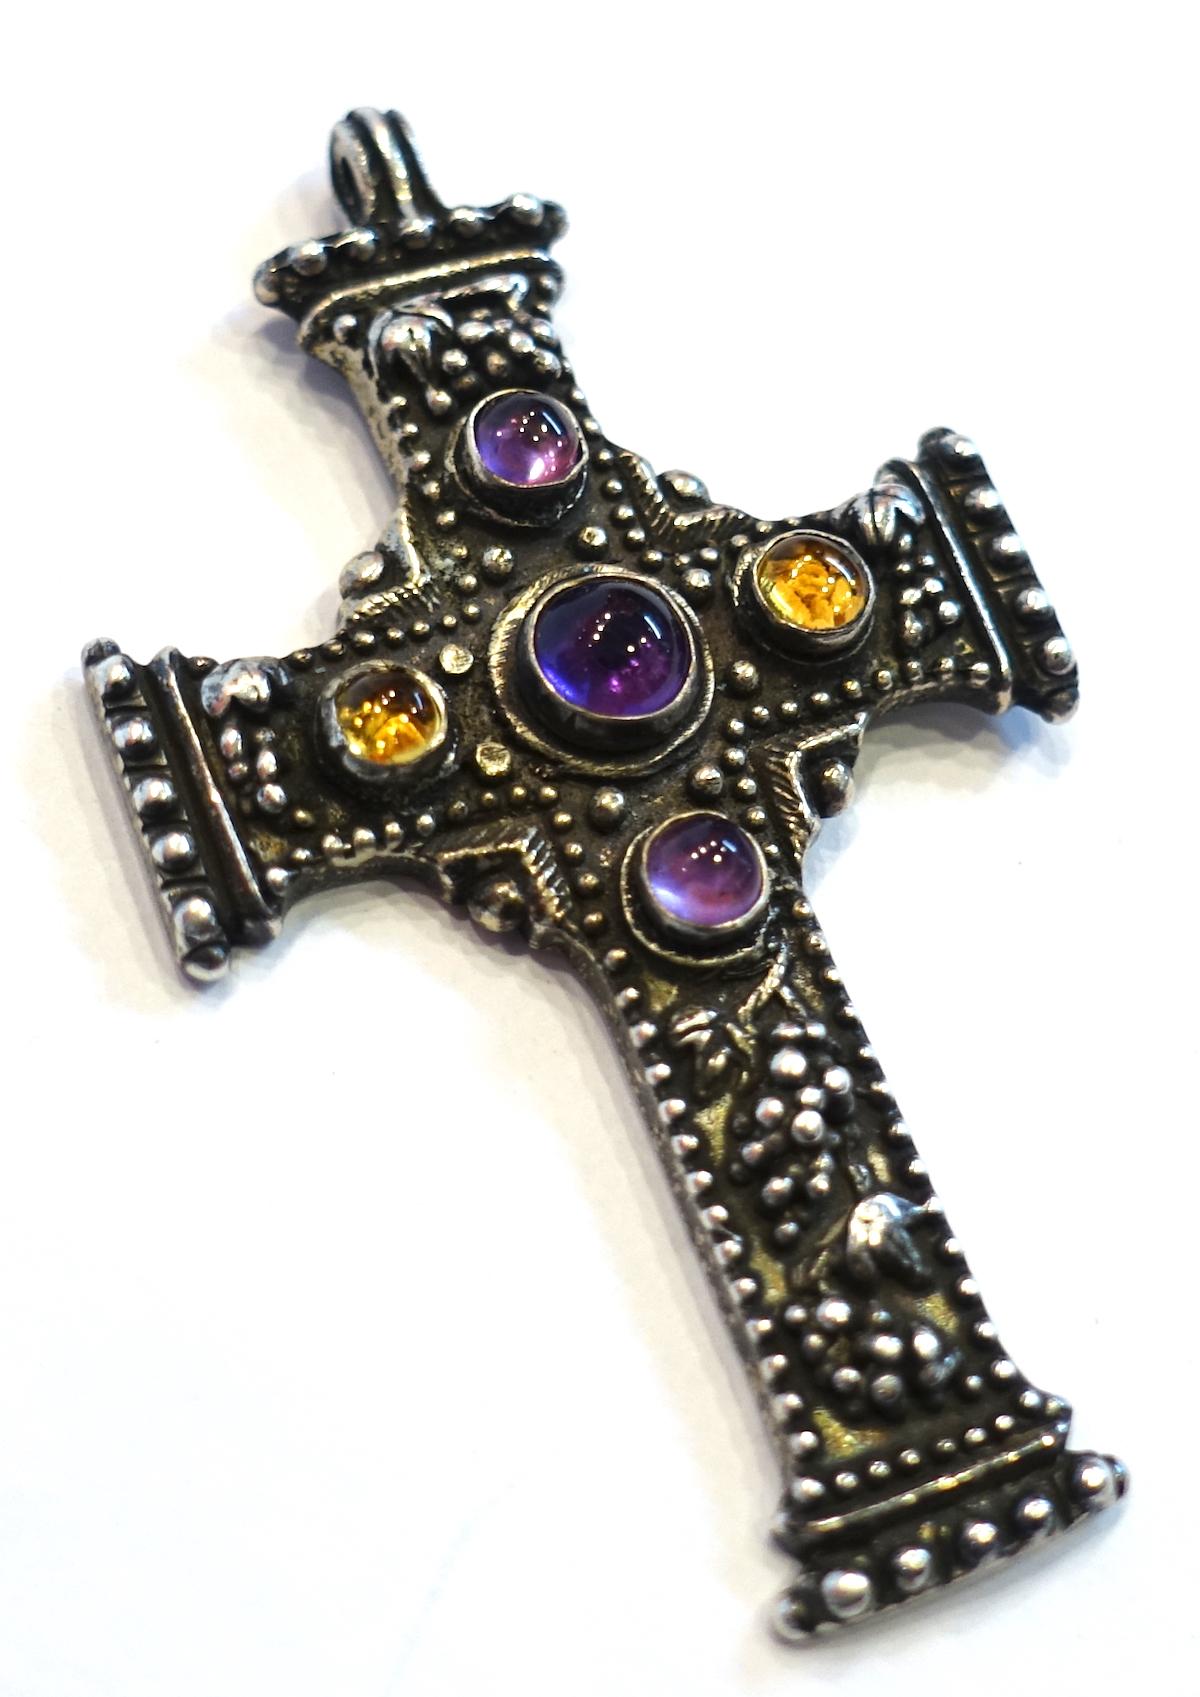 This vintage signed R. Collins cross pendant has an intricate carved design with cabochon cut amethyst and amber stones in a sterling silver setting.  This pendant measures 2-1/2” x 1-3/8” and is signed “R. Collins 91”.  It is in excellent condition.